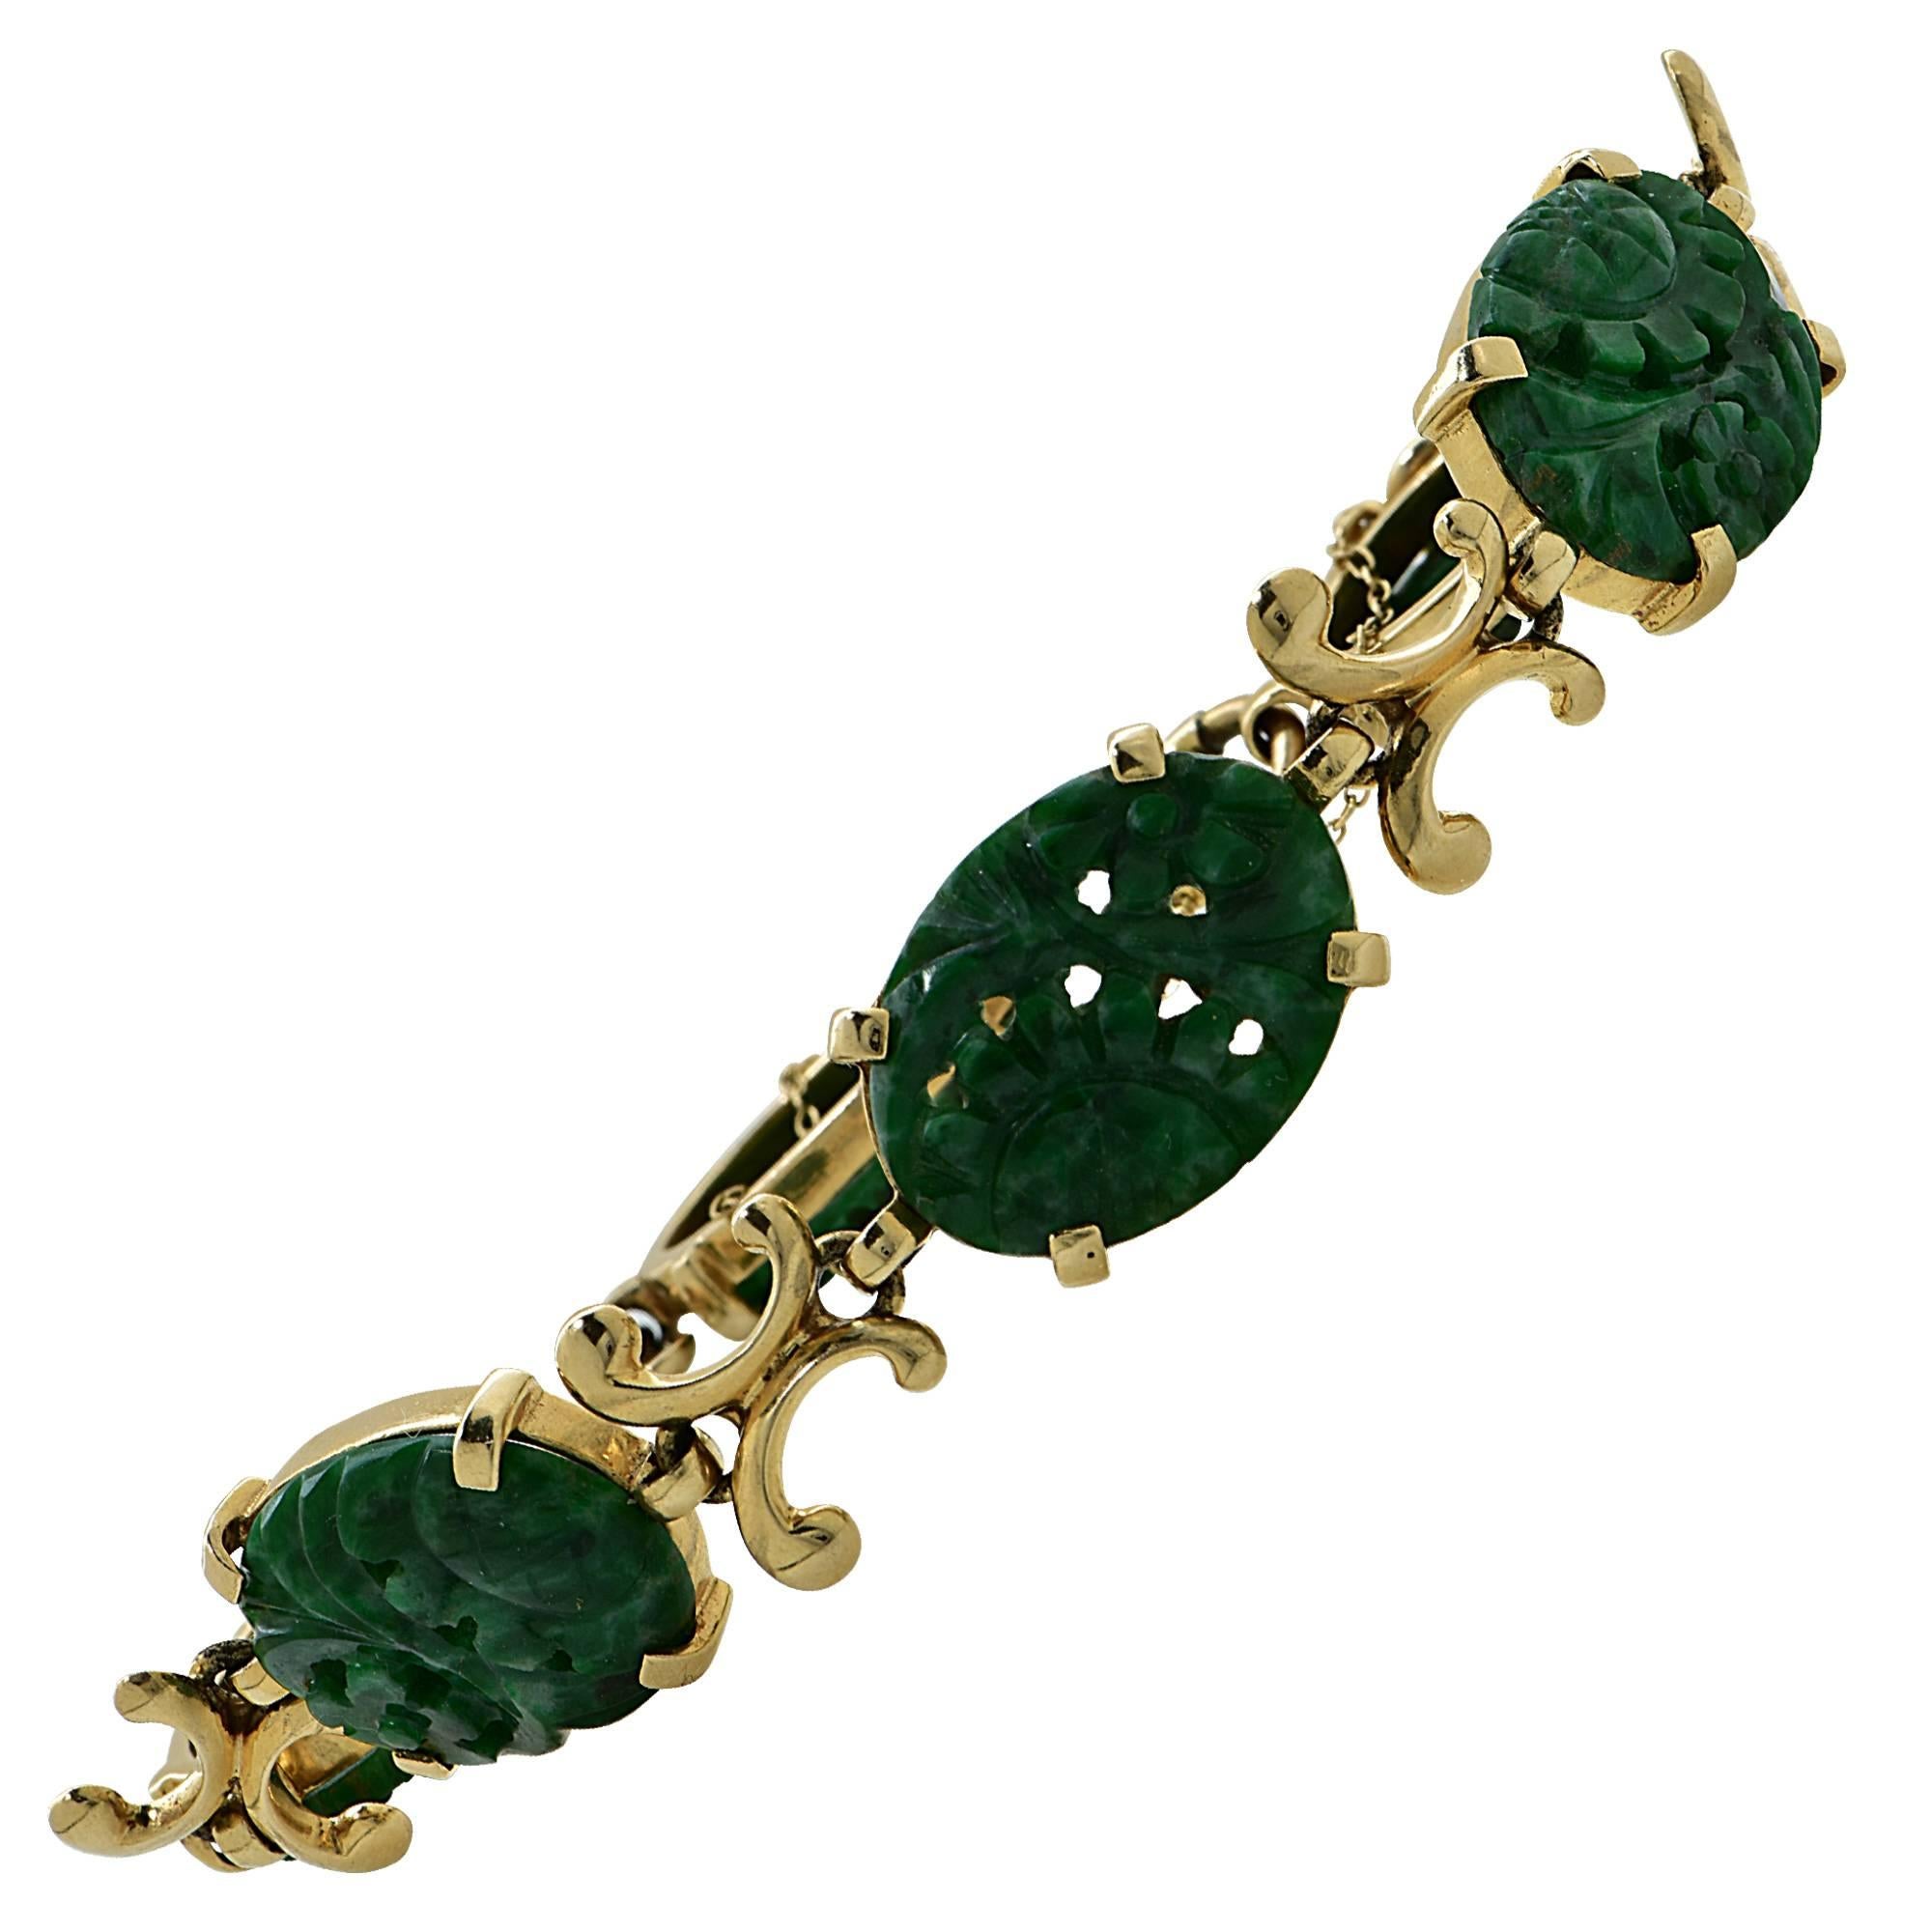 14k yellow gold carved jade bracelet.

The bracelet is 7 inches in length and .52 inch in width.
It is stamped and tested as 14k gold.
The metal weight is 21.22 grams.

This jade bracelet is accompanied by a retail appraisal performed by a